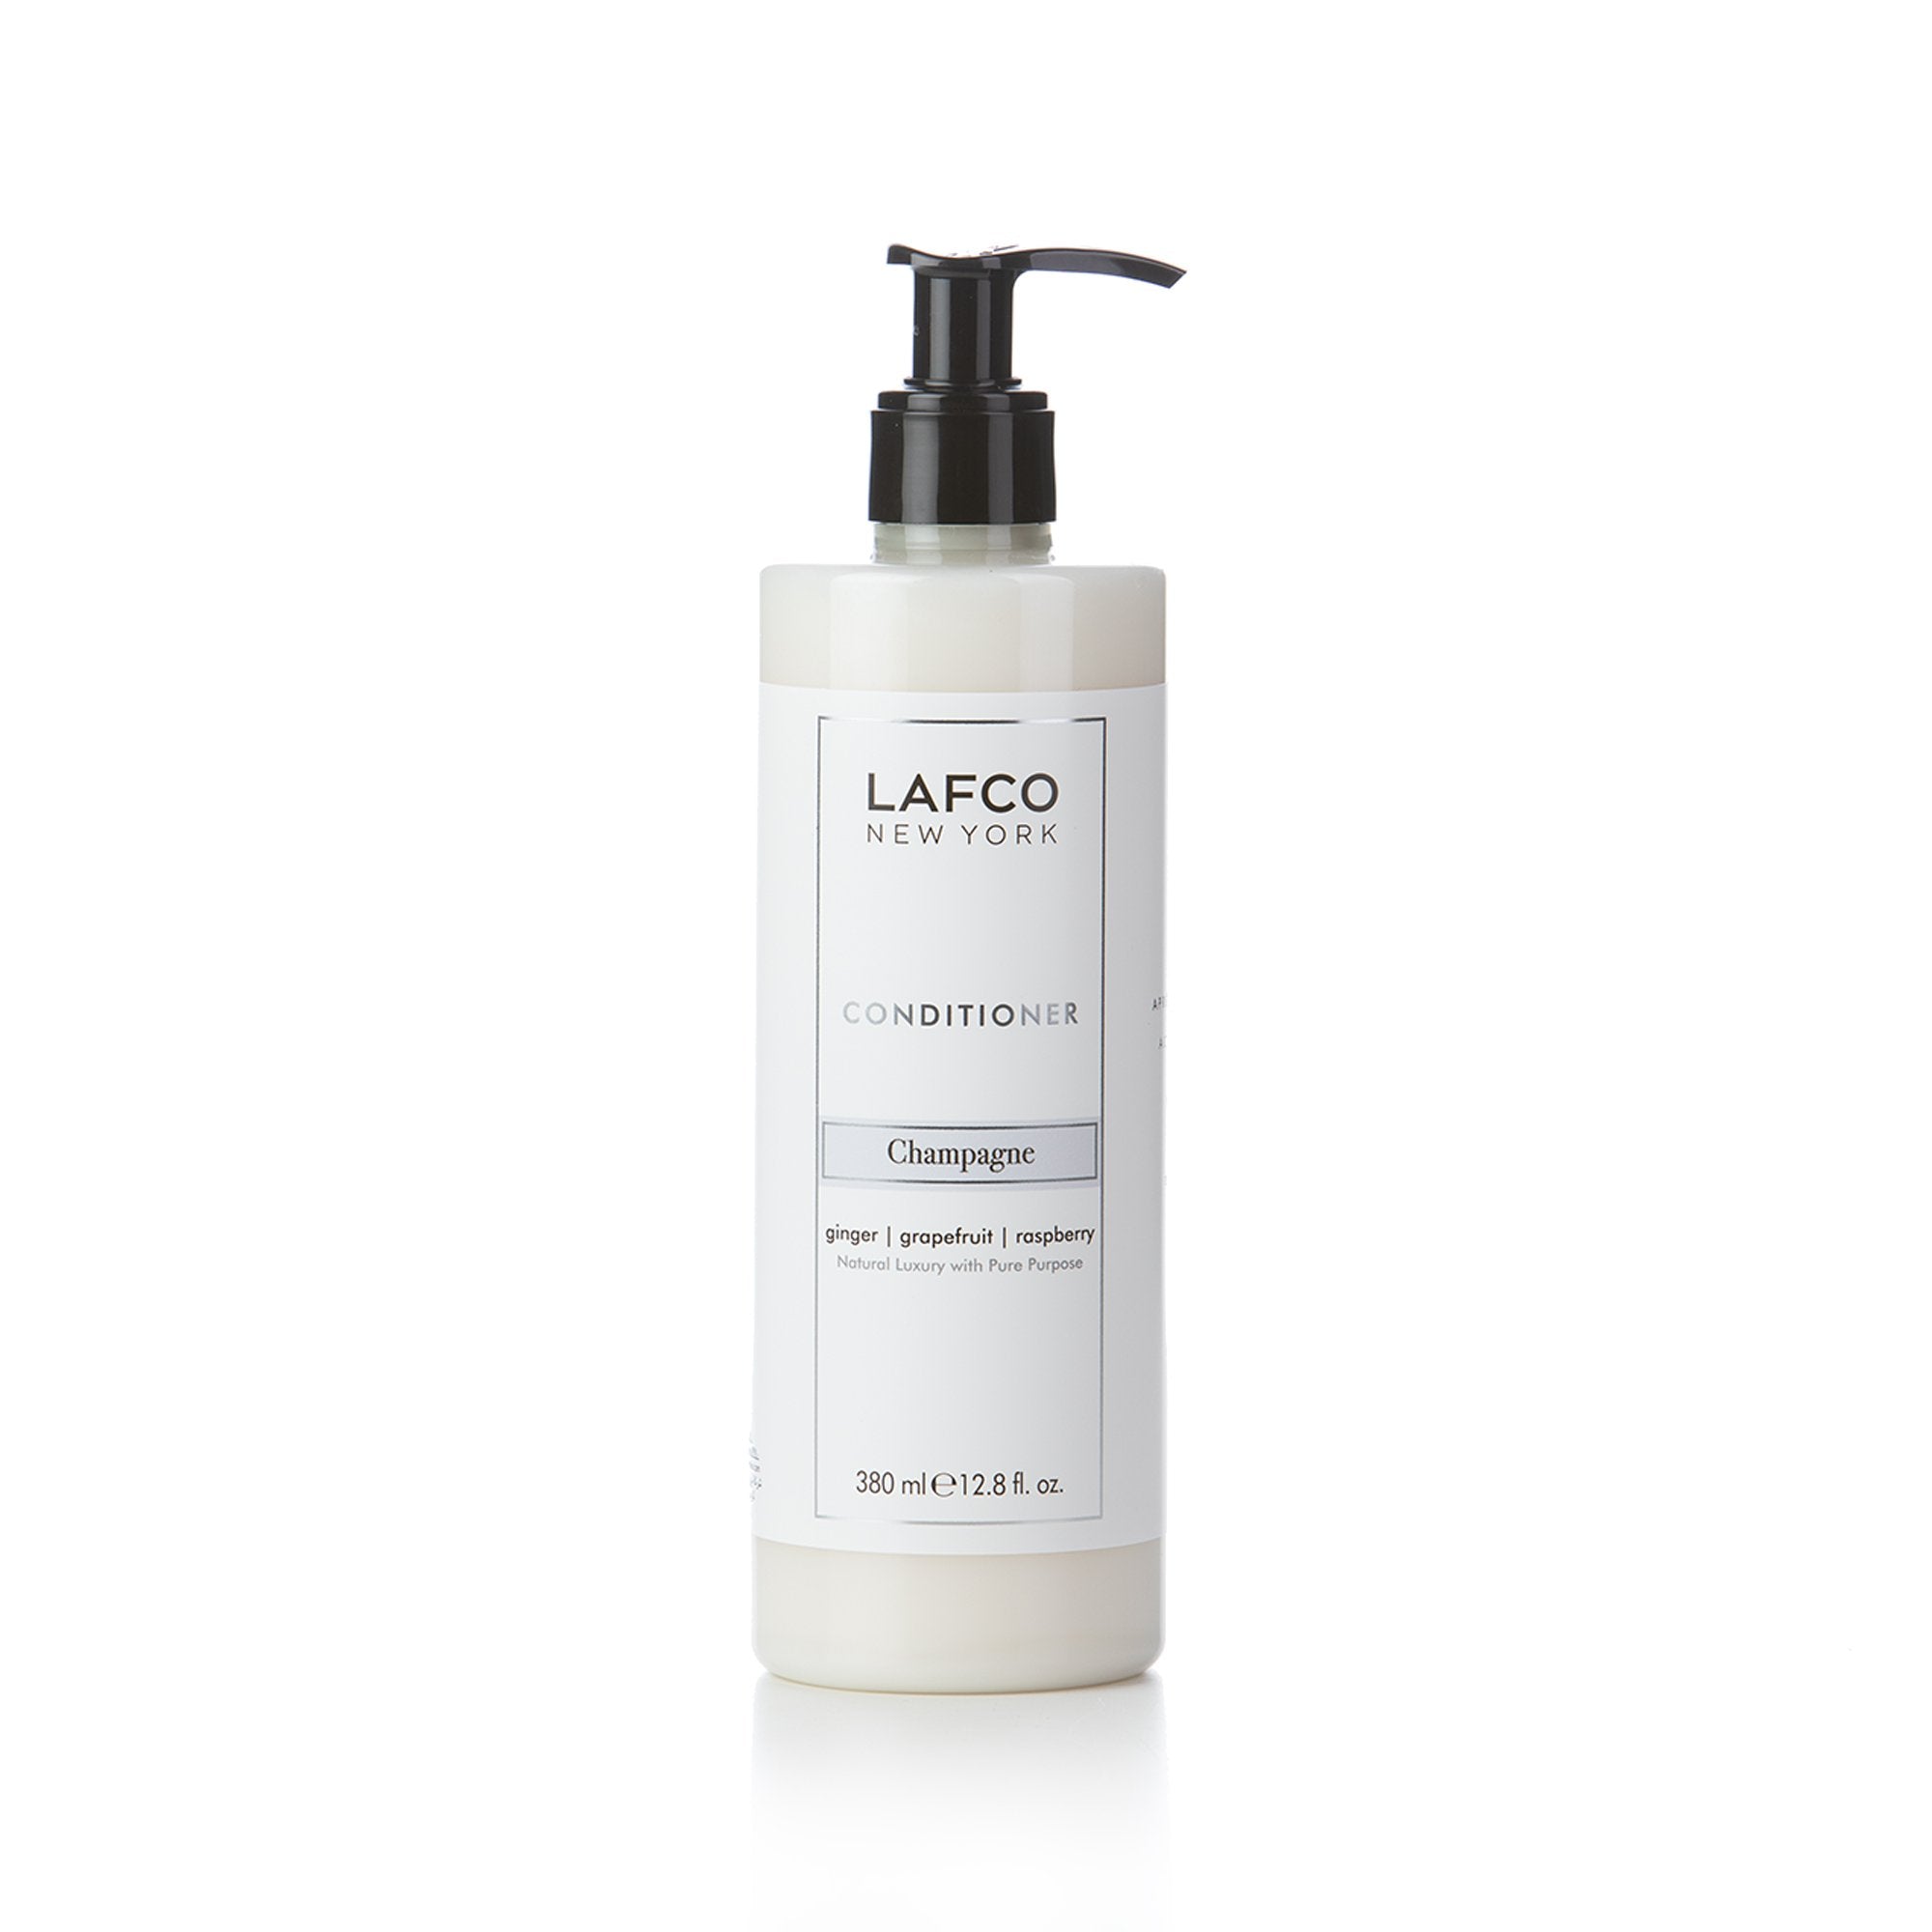 Lafco "Champagne" Conditioner With Locked Pump (380 ml) 